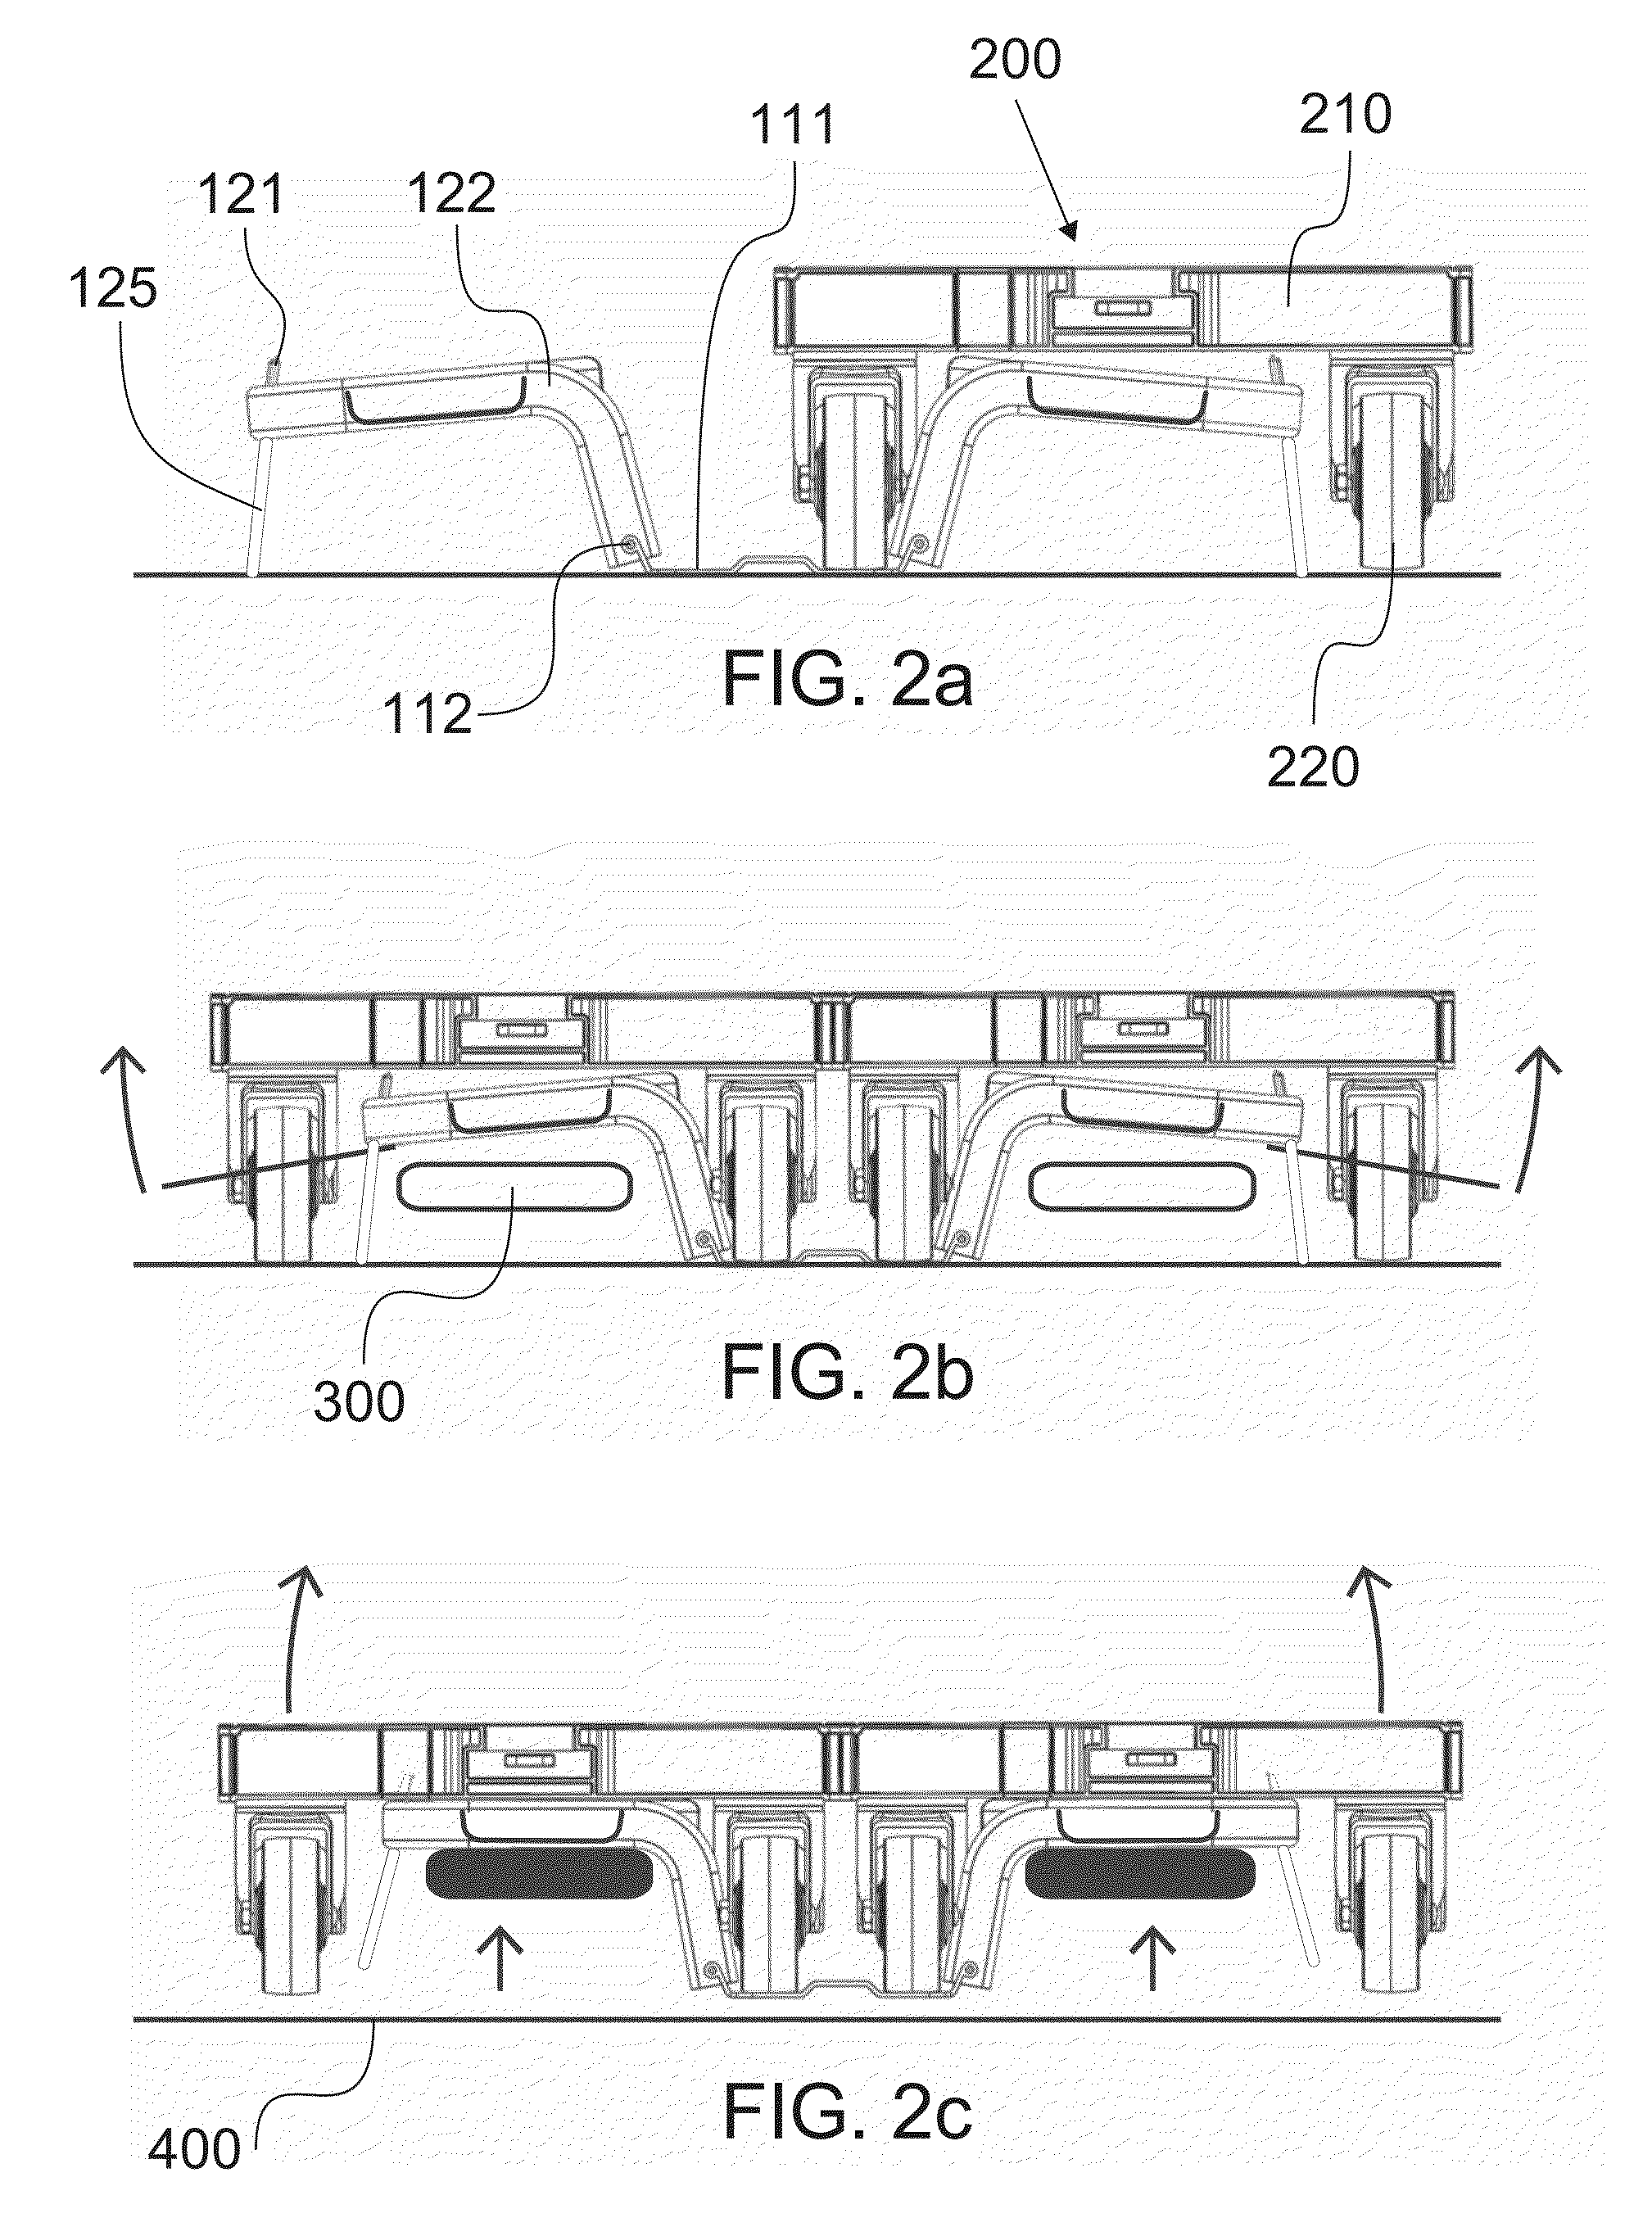 Adaptor pallet and method of transporting a plurality of dollies by means of an adaptor pallet